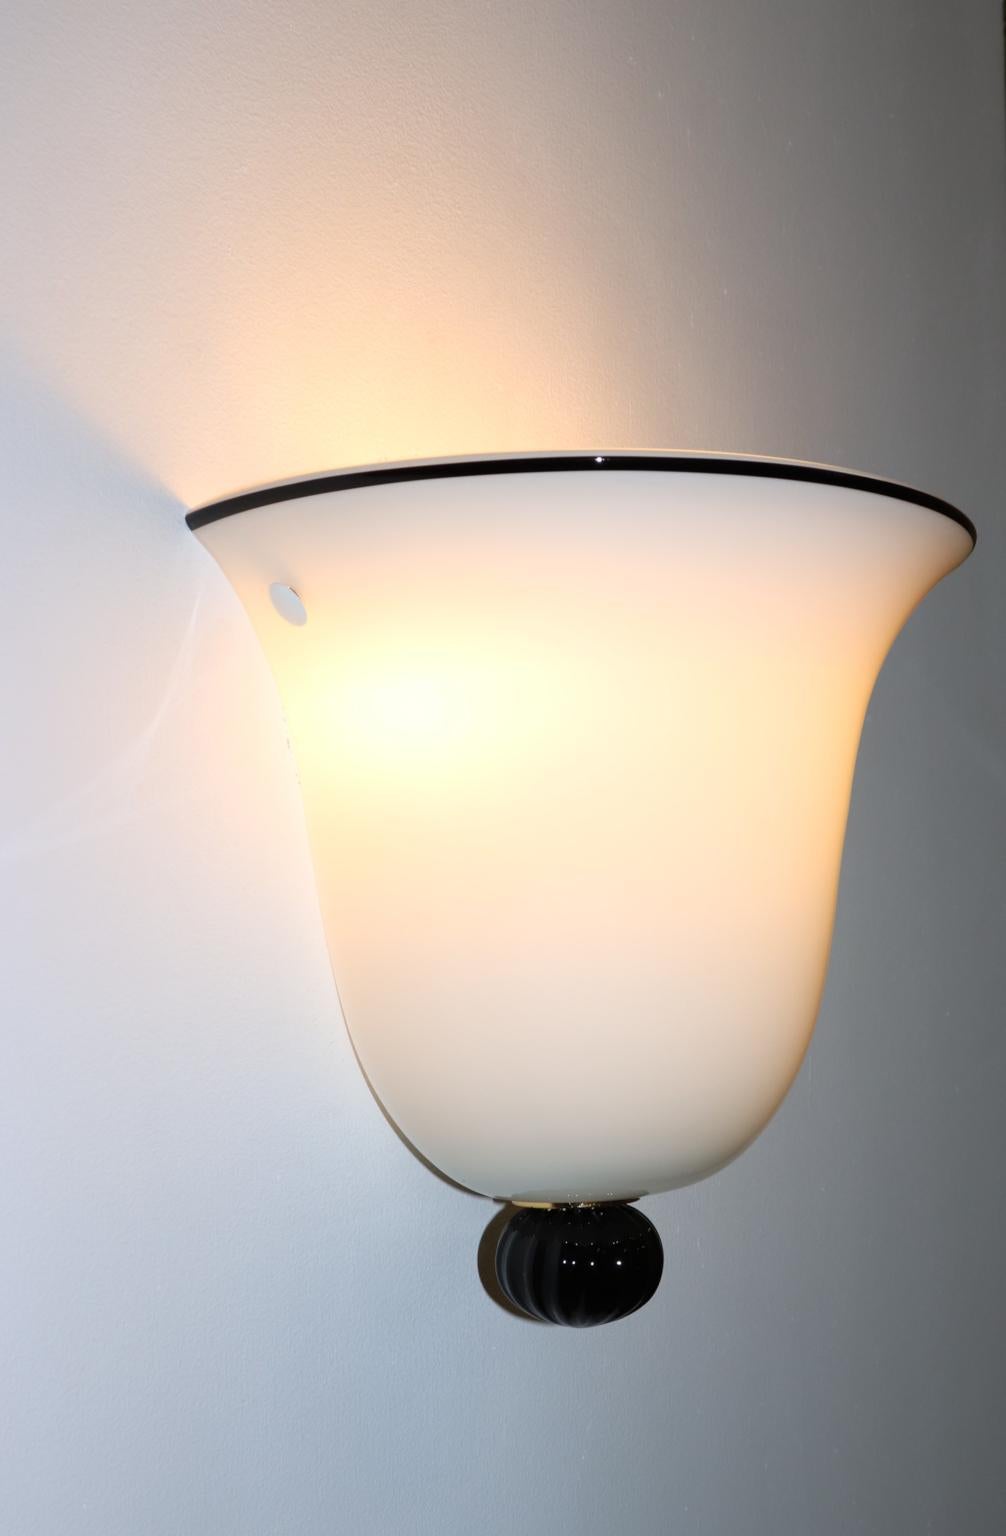 Italian wall light milky white Murano hand blown glass with black border and ball. Manufactured by Murano Due.
Design from 